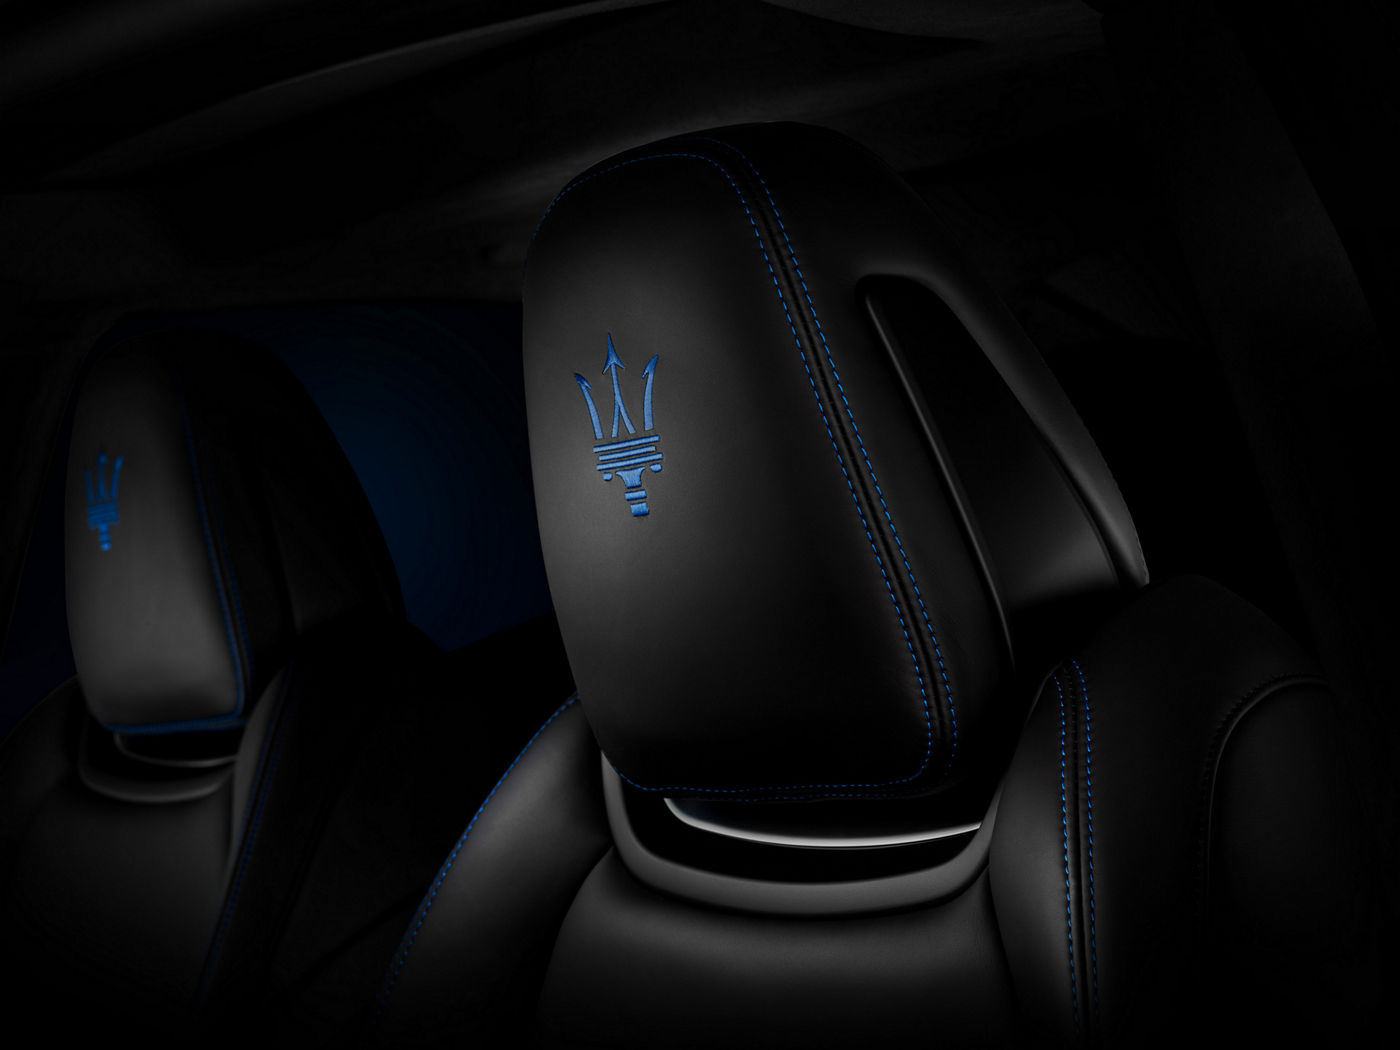 Maserati Levante GTS ONE OF ONE headrest with "Ray" writing dedicated to Ray Allen